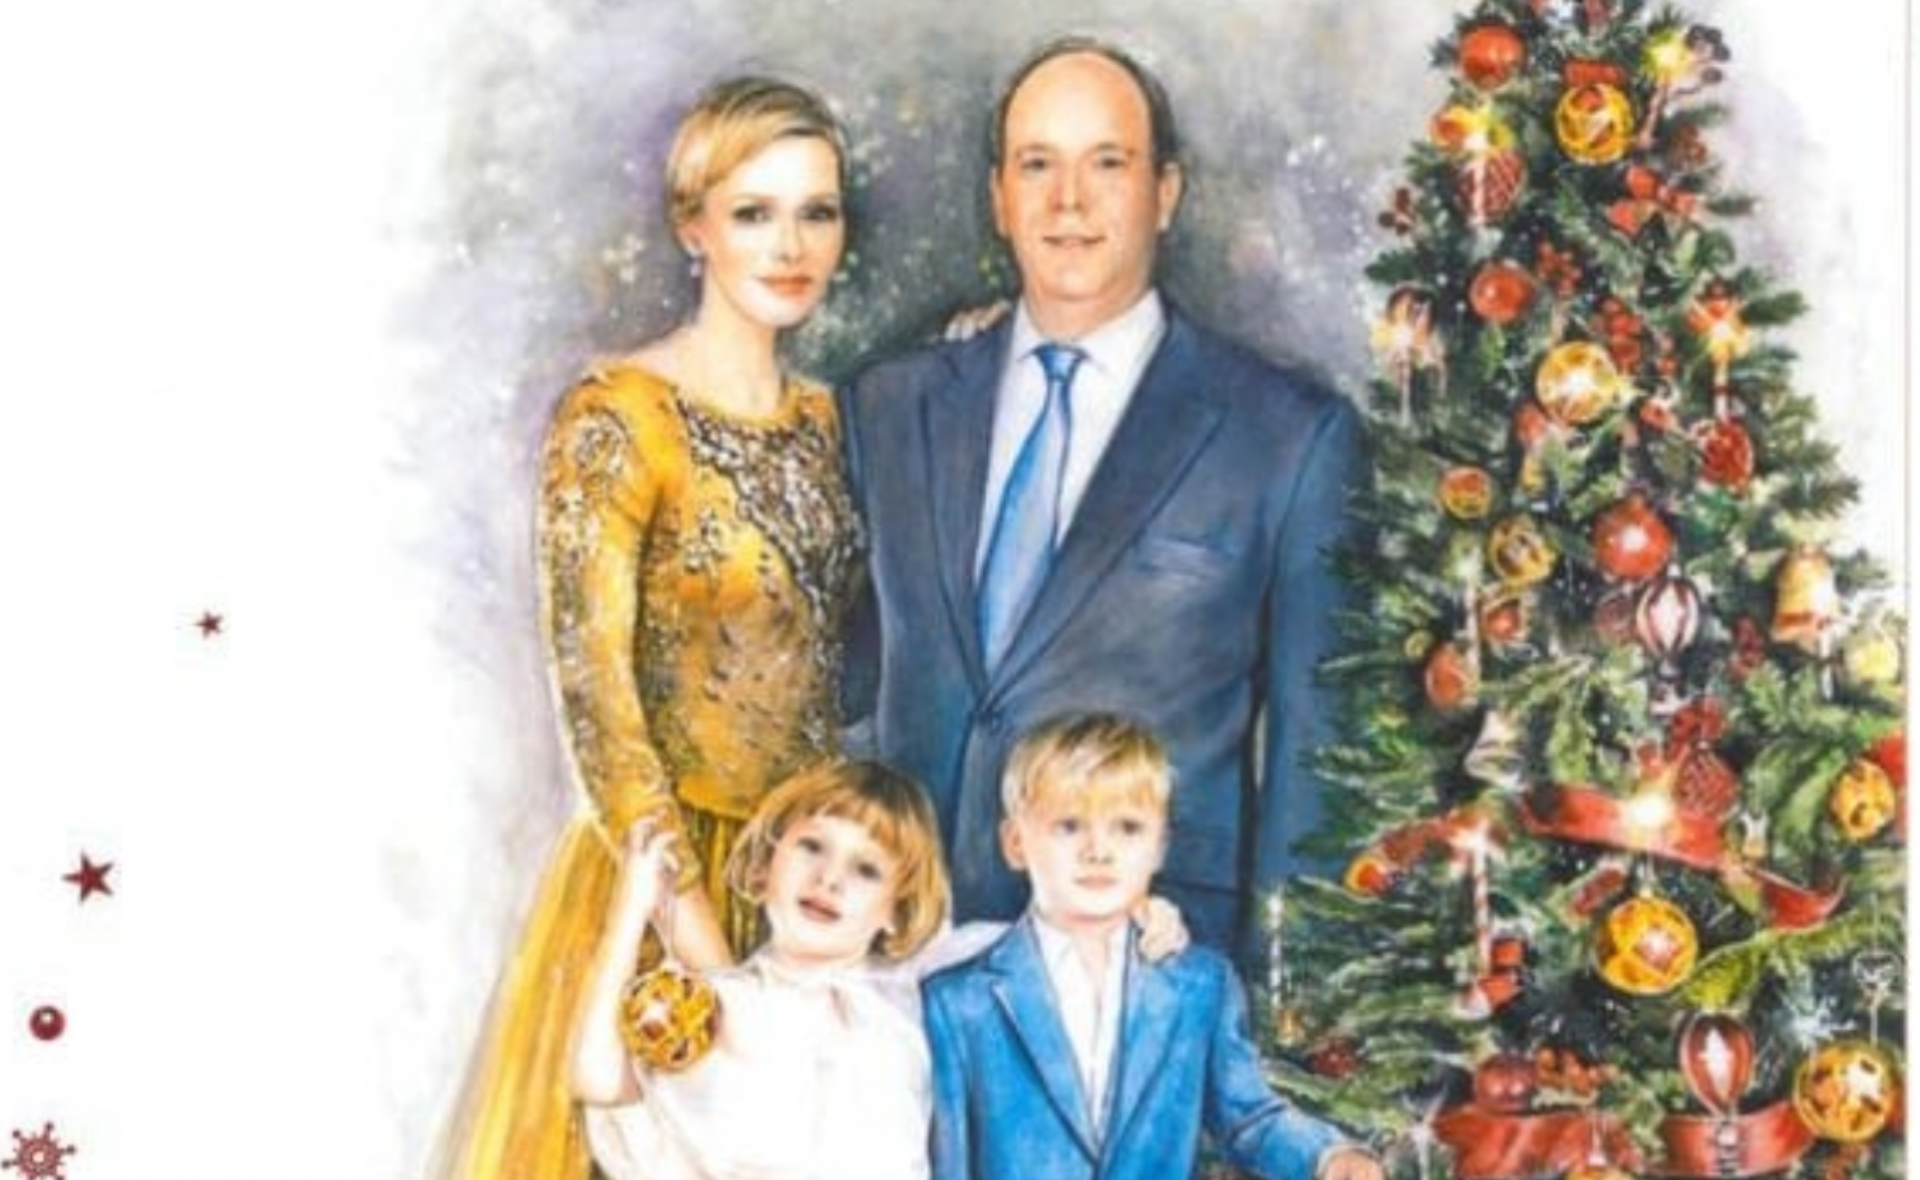 Princess Charlene shares the Monaco royal family’s unconventional Christmas card with fans